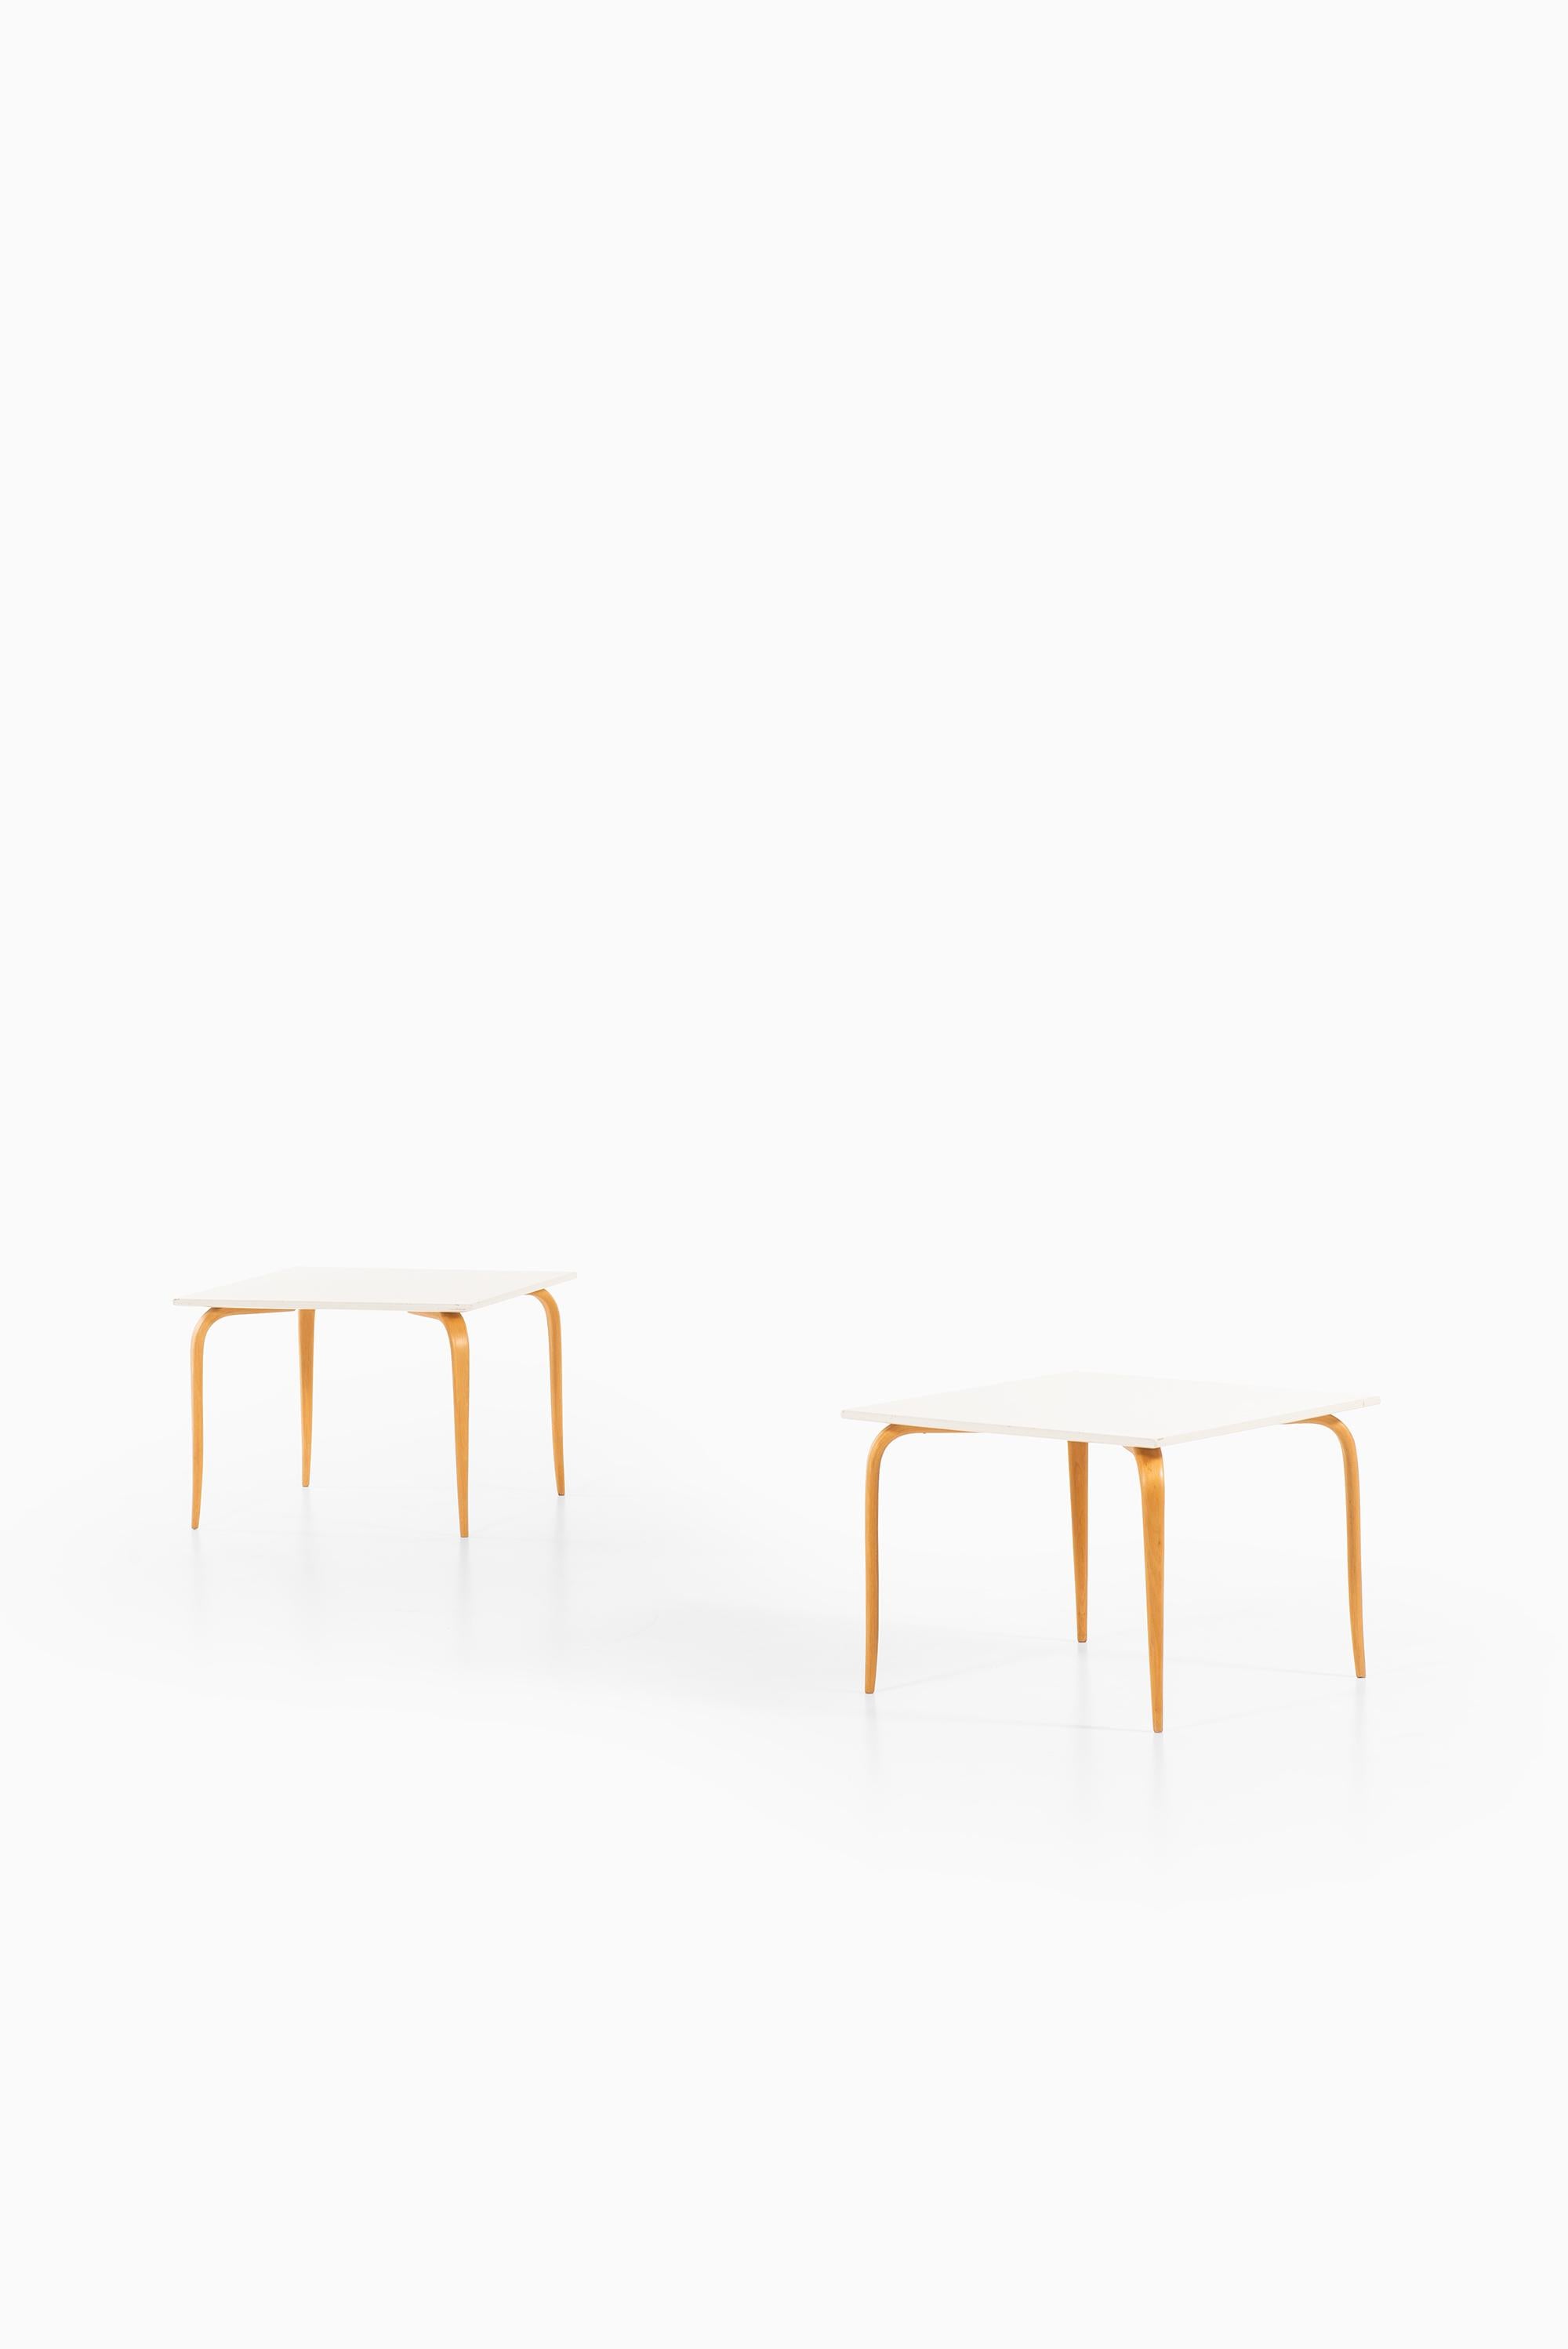 A pair of side tables model Annika designed by Bruno Mathsson. Produced by Karl Mathsson in Värnamo, Sweden.